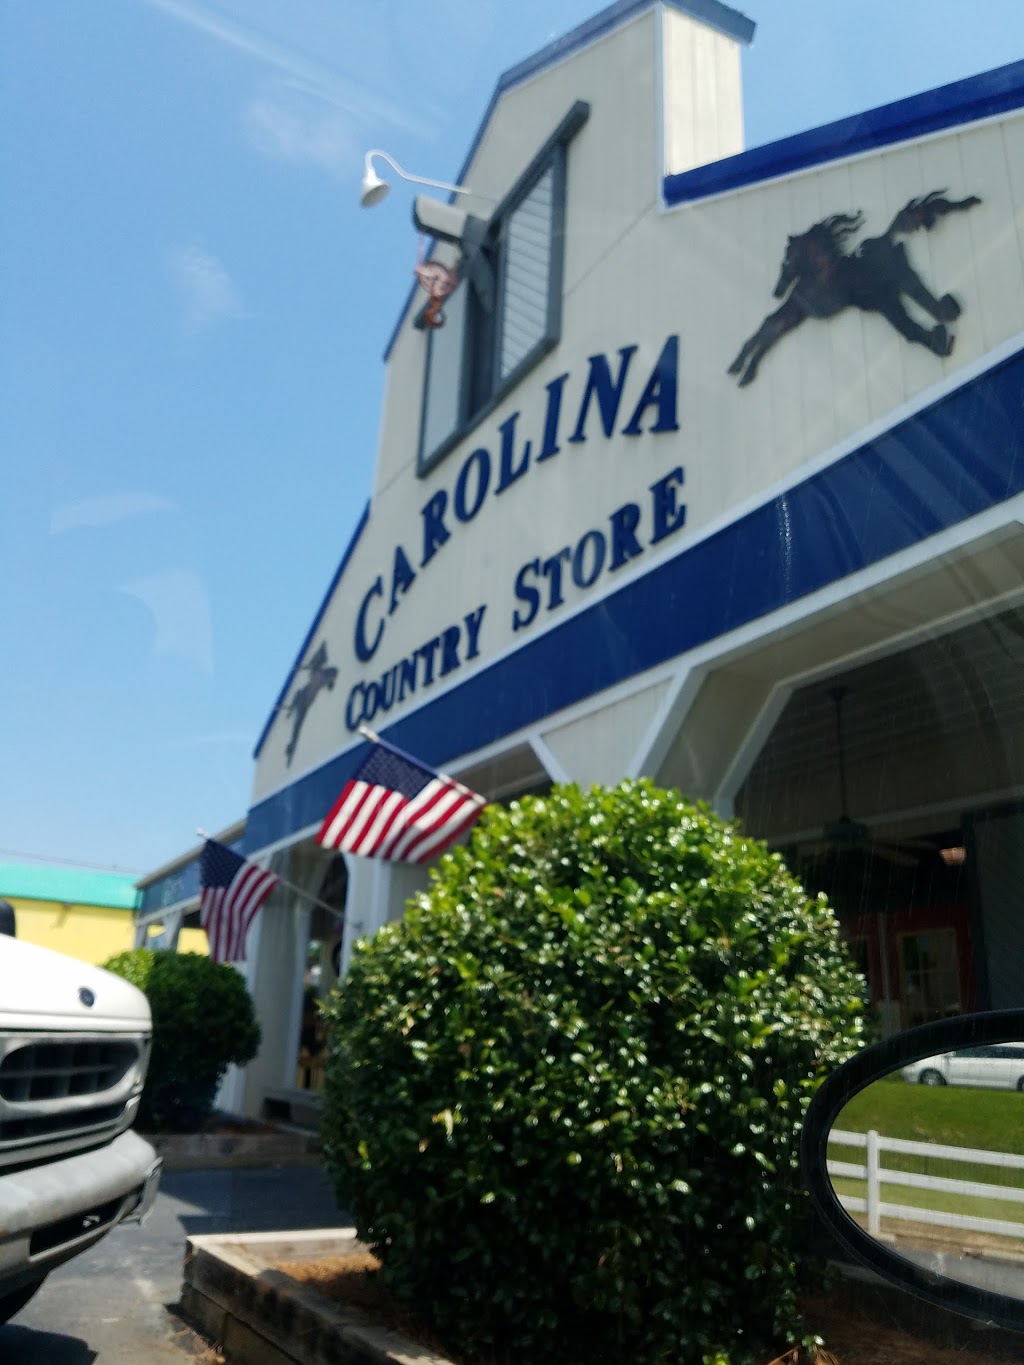 Carolina Country Store Inc | 9510 Charlotte Hwy, Fort Mill, SC 29707 | Phone: (803) 547-5146